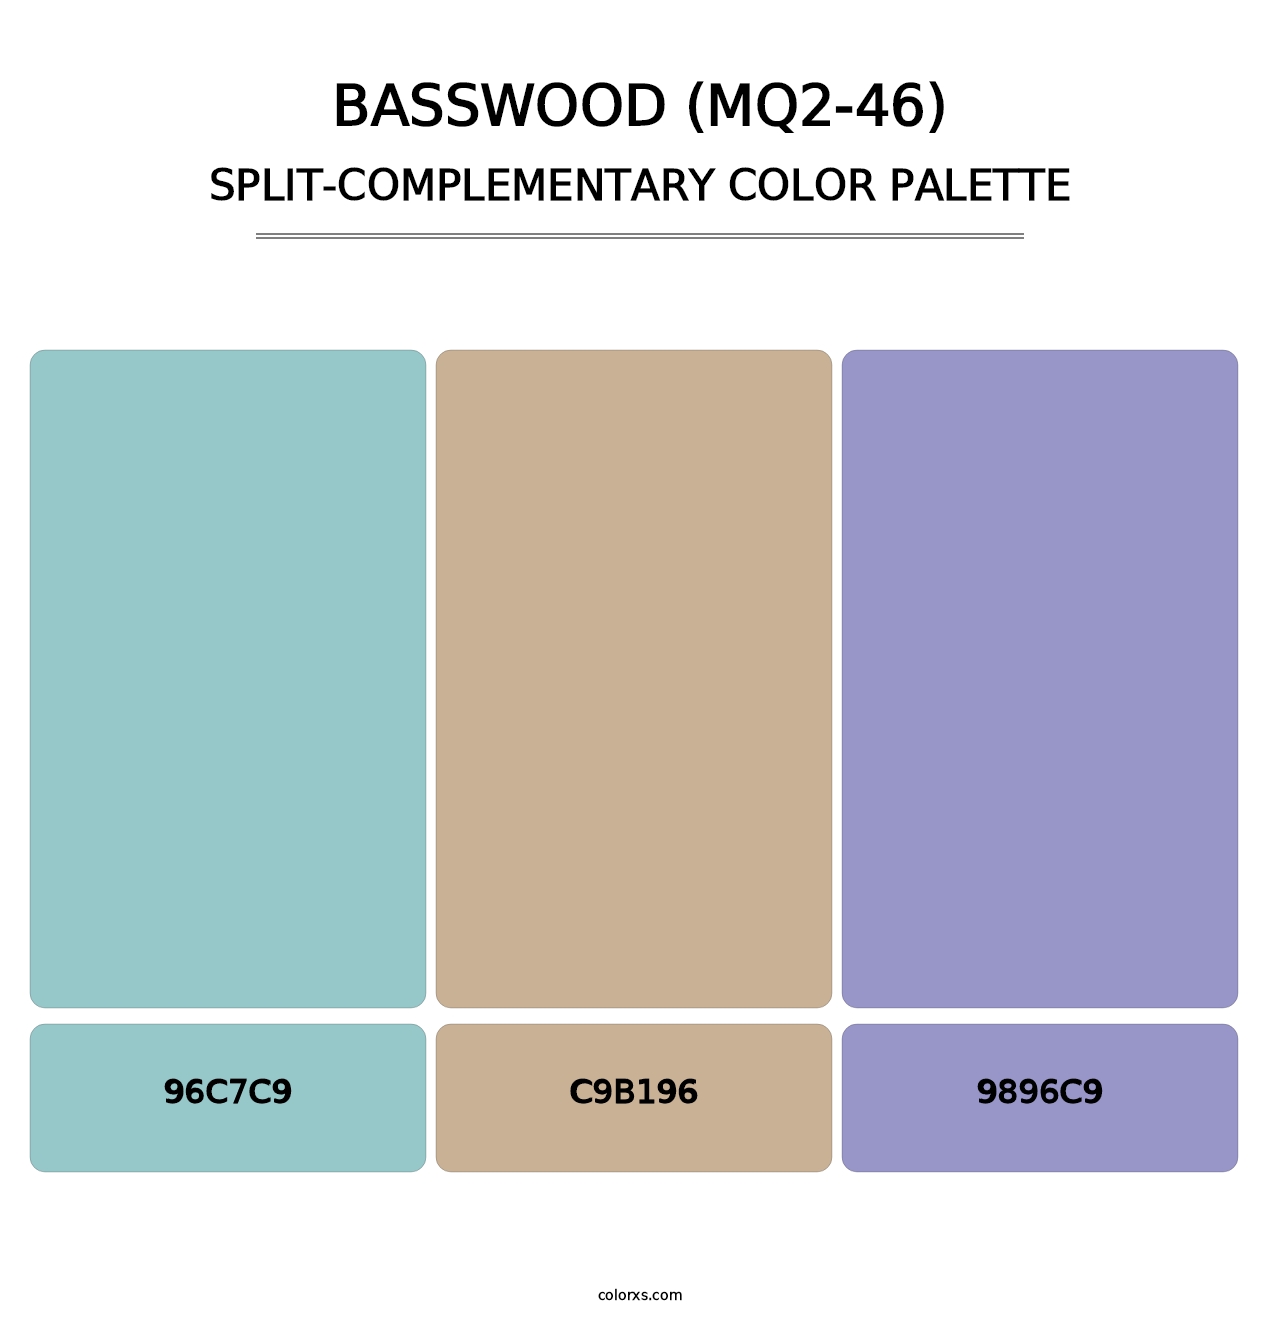 Basswood (MQ2-46) - Split-Complementary Color Palette